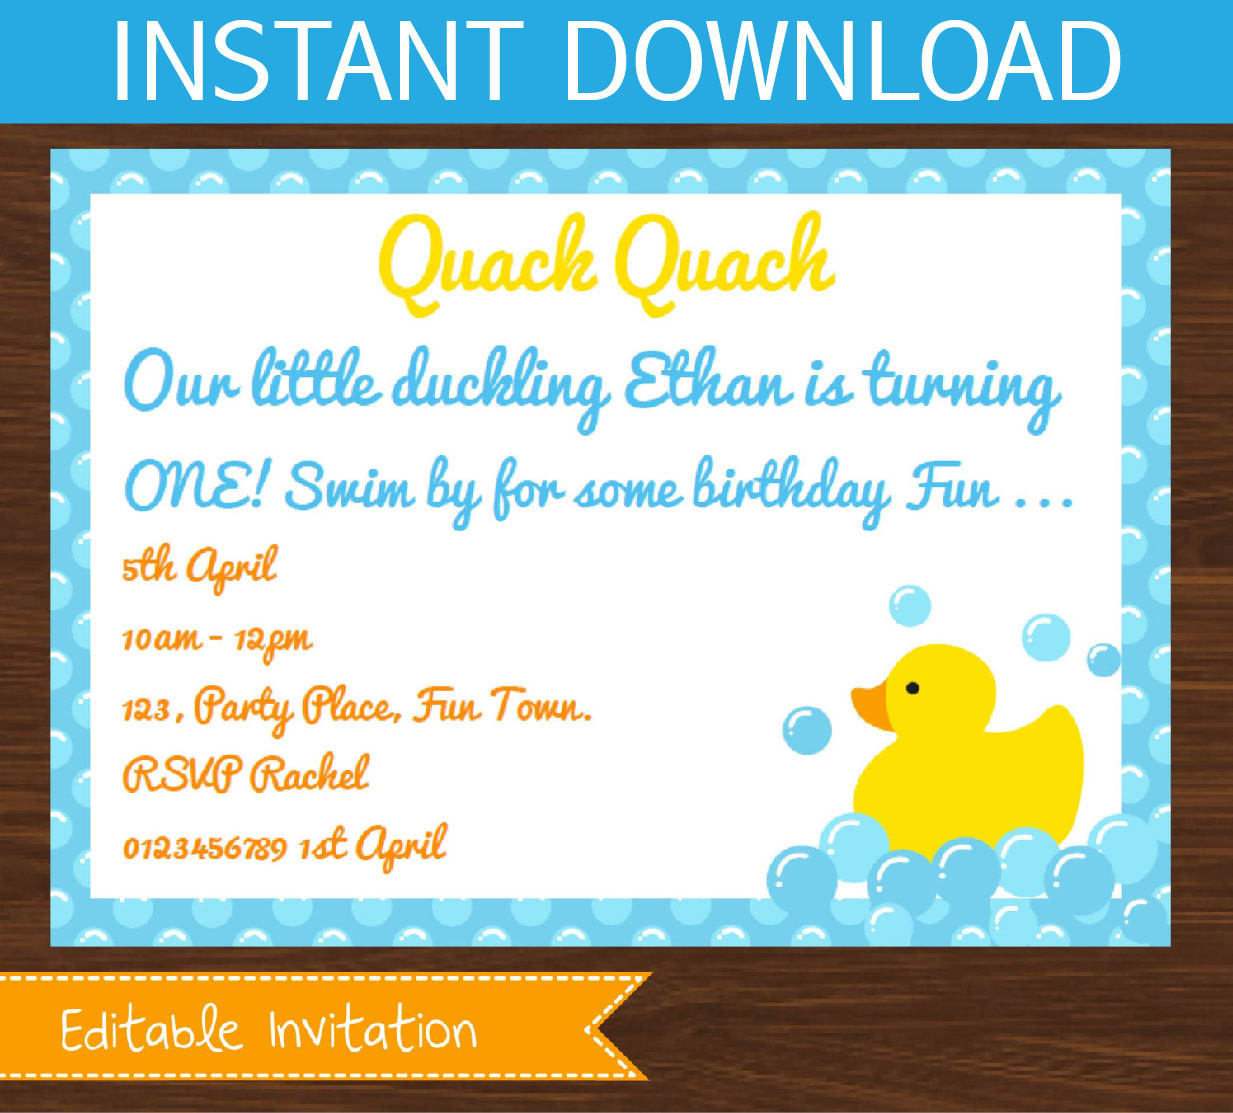 DIY Baby Shower Invitations Kits
 Rubber ducky baby shower invitation editable DIY Printable Kit